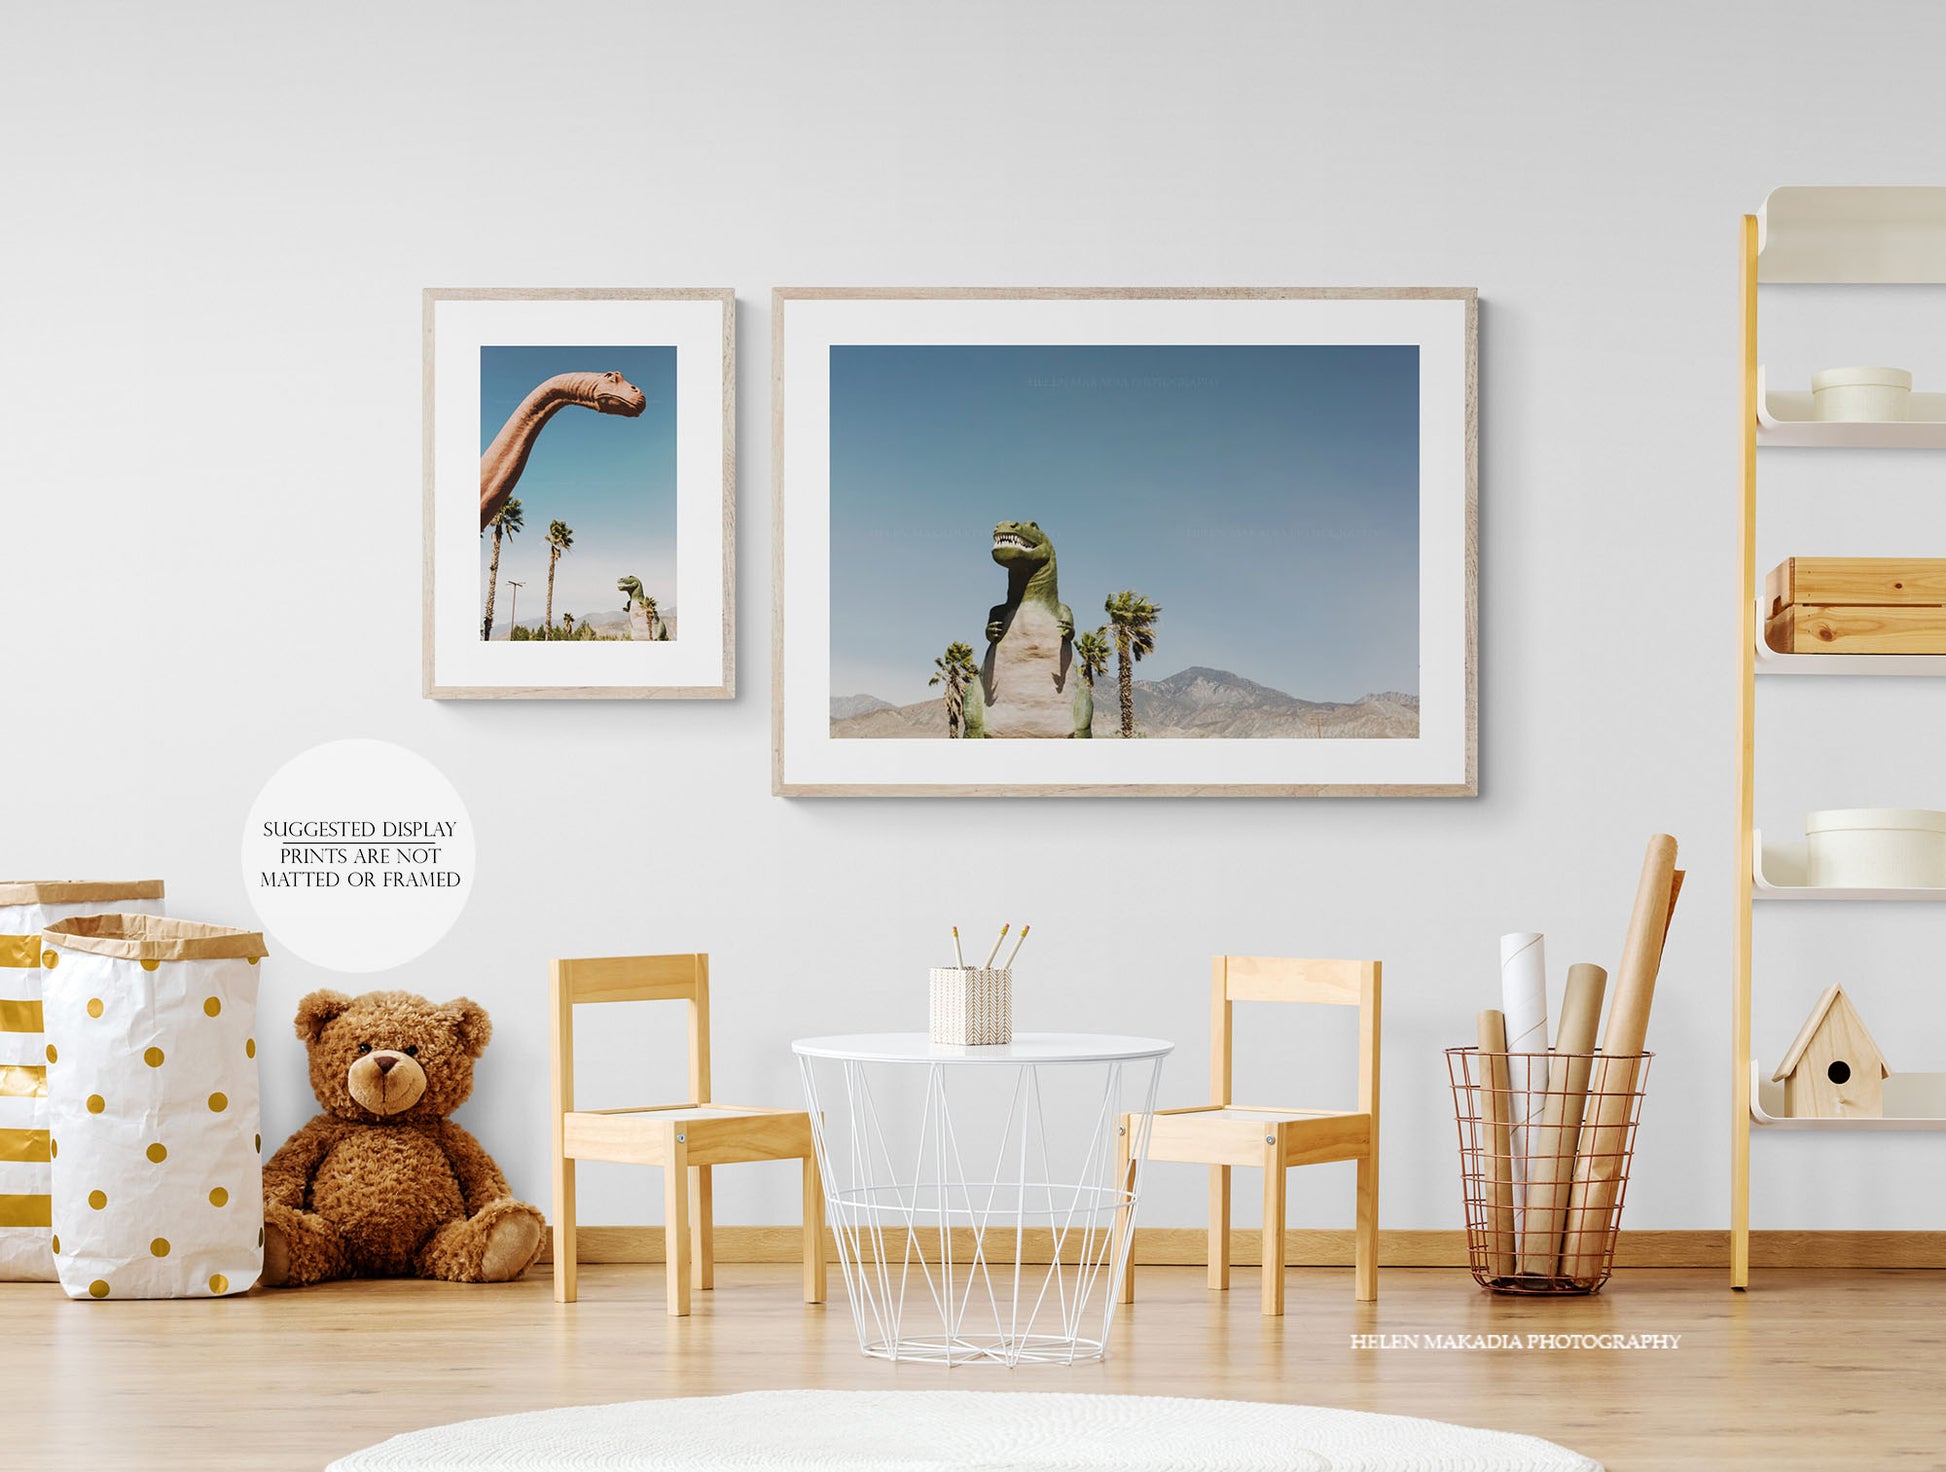 Framed Prints of T-Rex and Brontosaurus in a Playroom